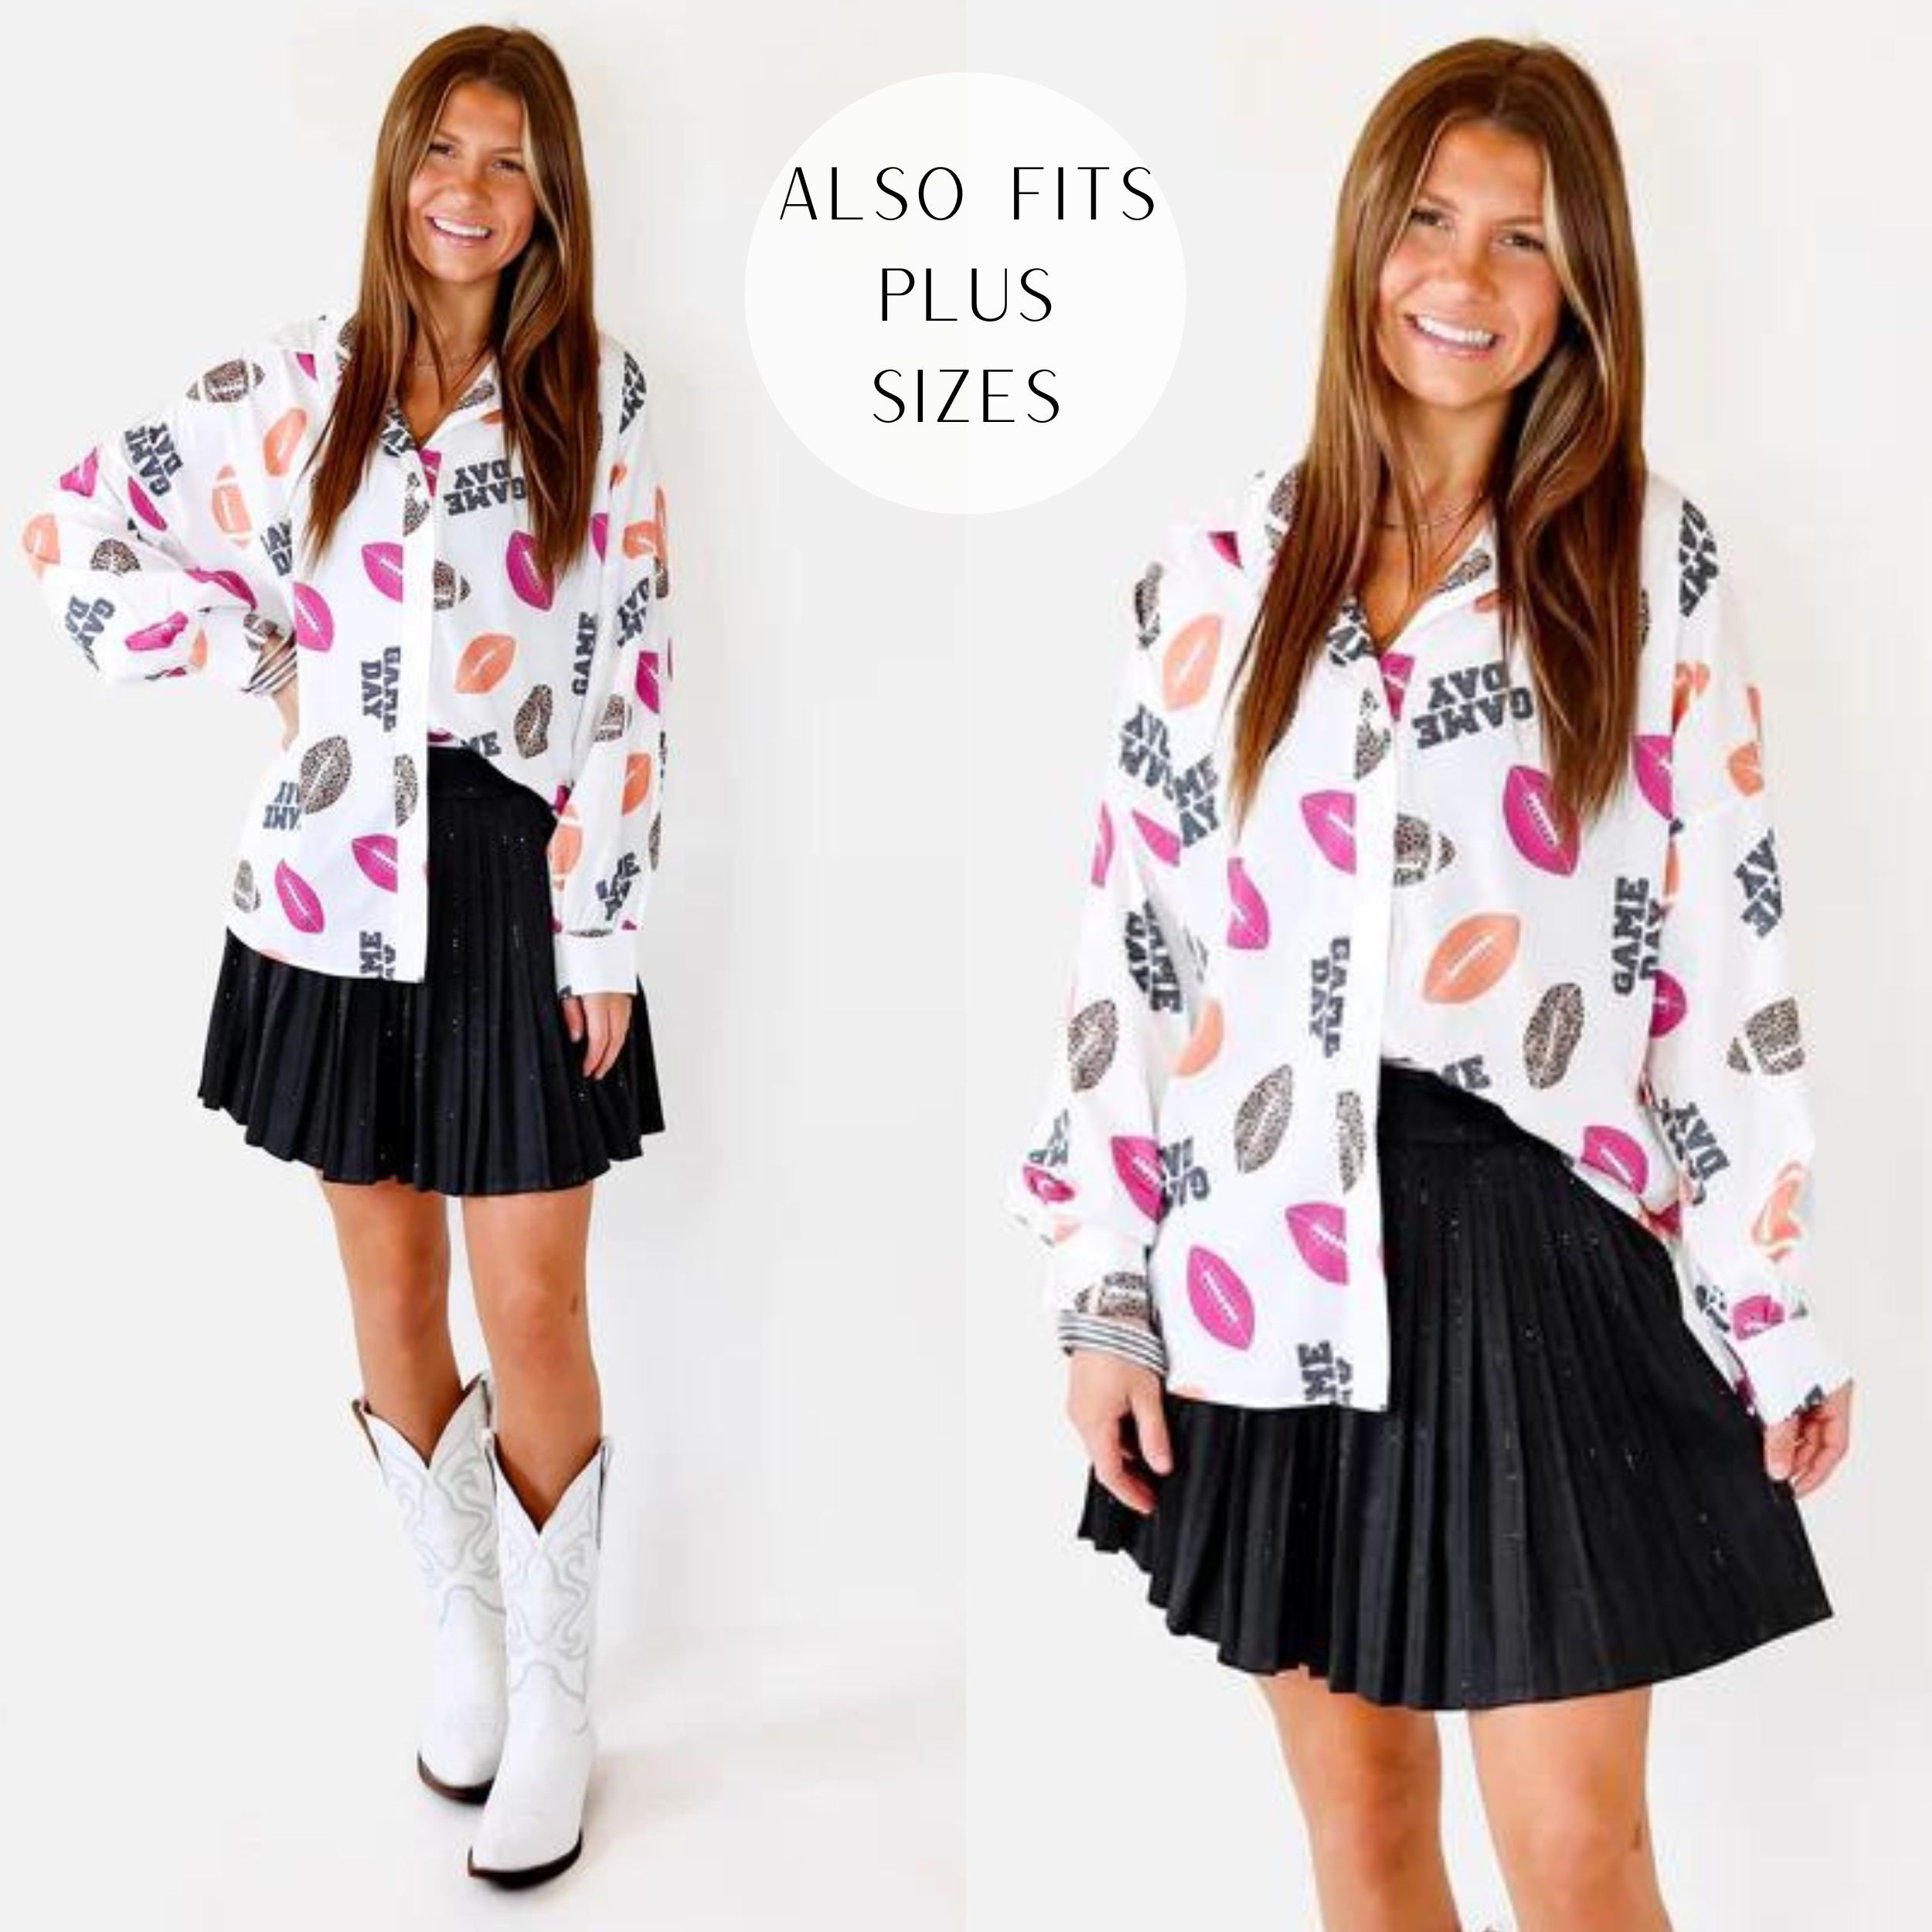 The Gameday Way Button Up Football Print Top in White - Giddy Up Glamour Boutique